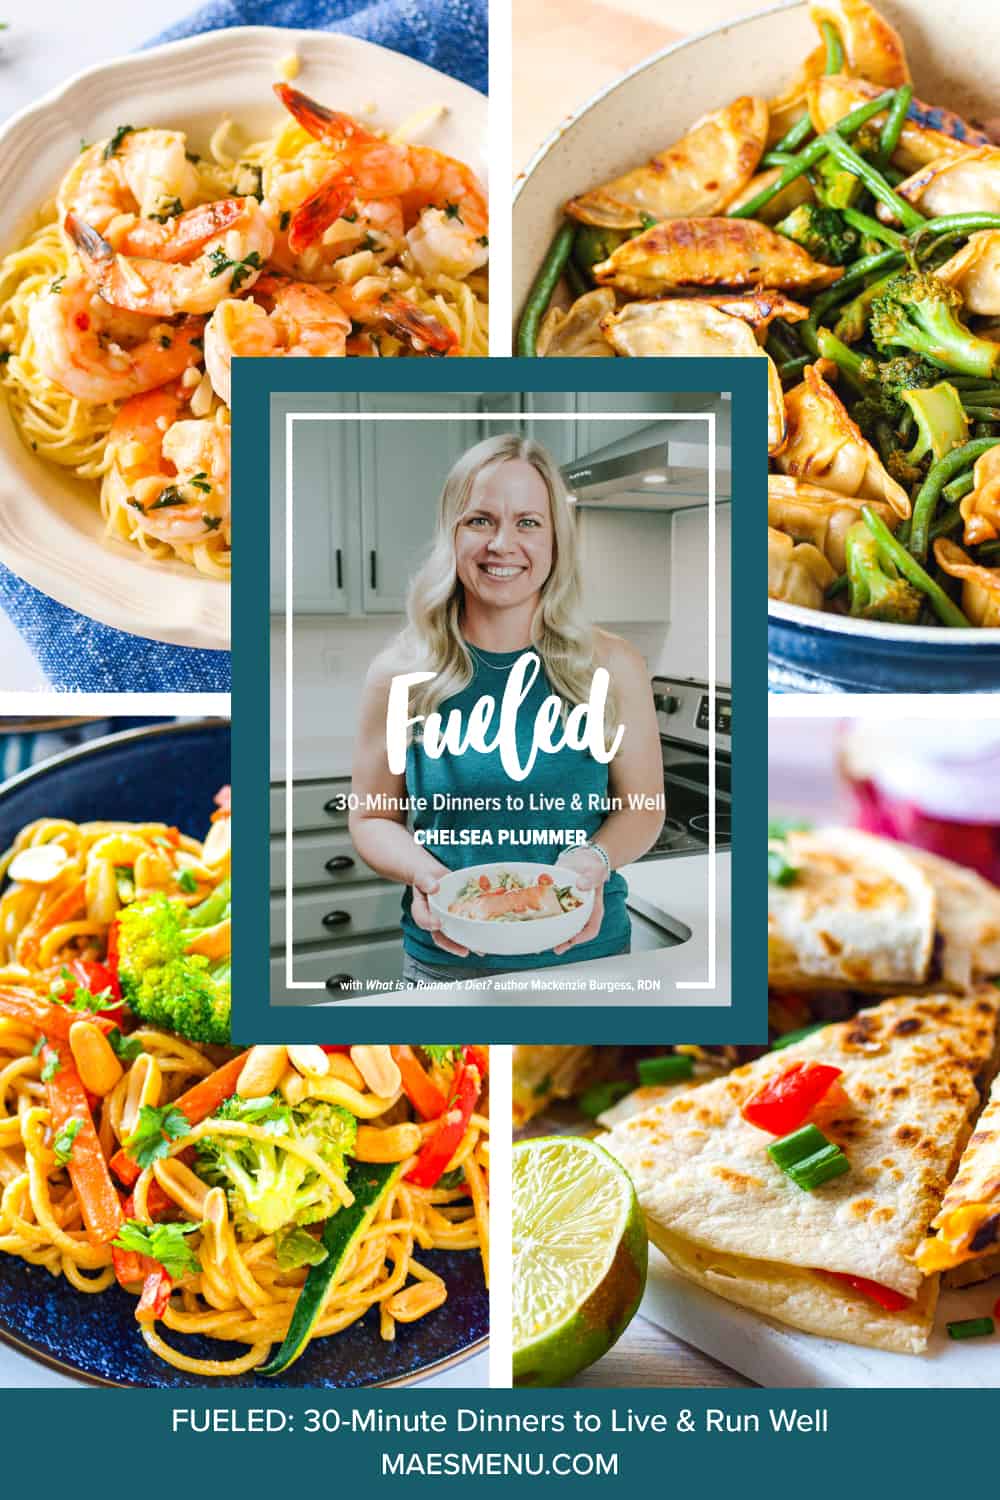 The cover of the Fueled ecookbook with some images of the recipes in the background